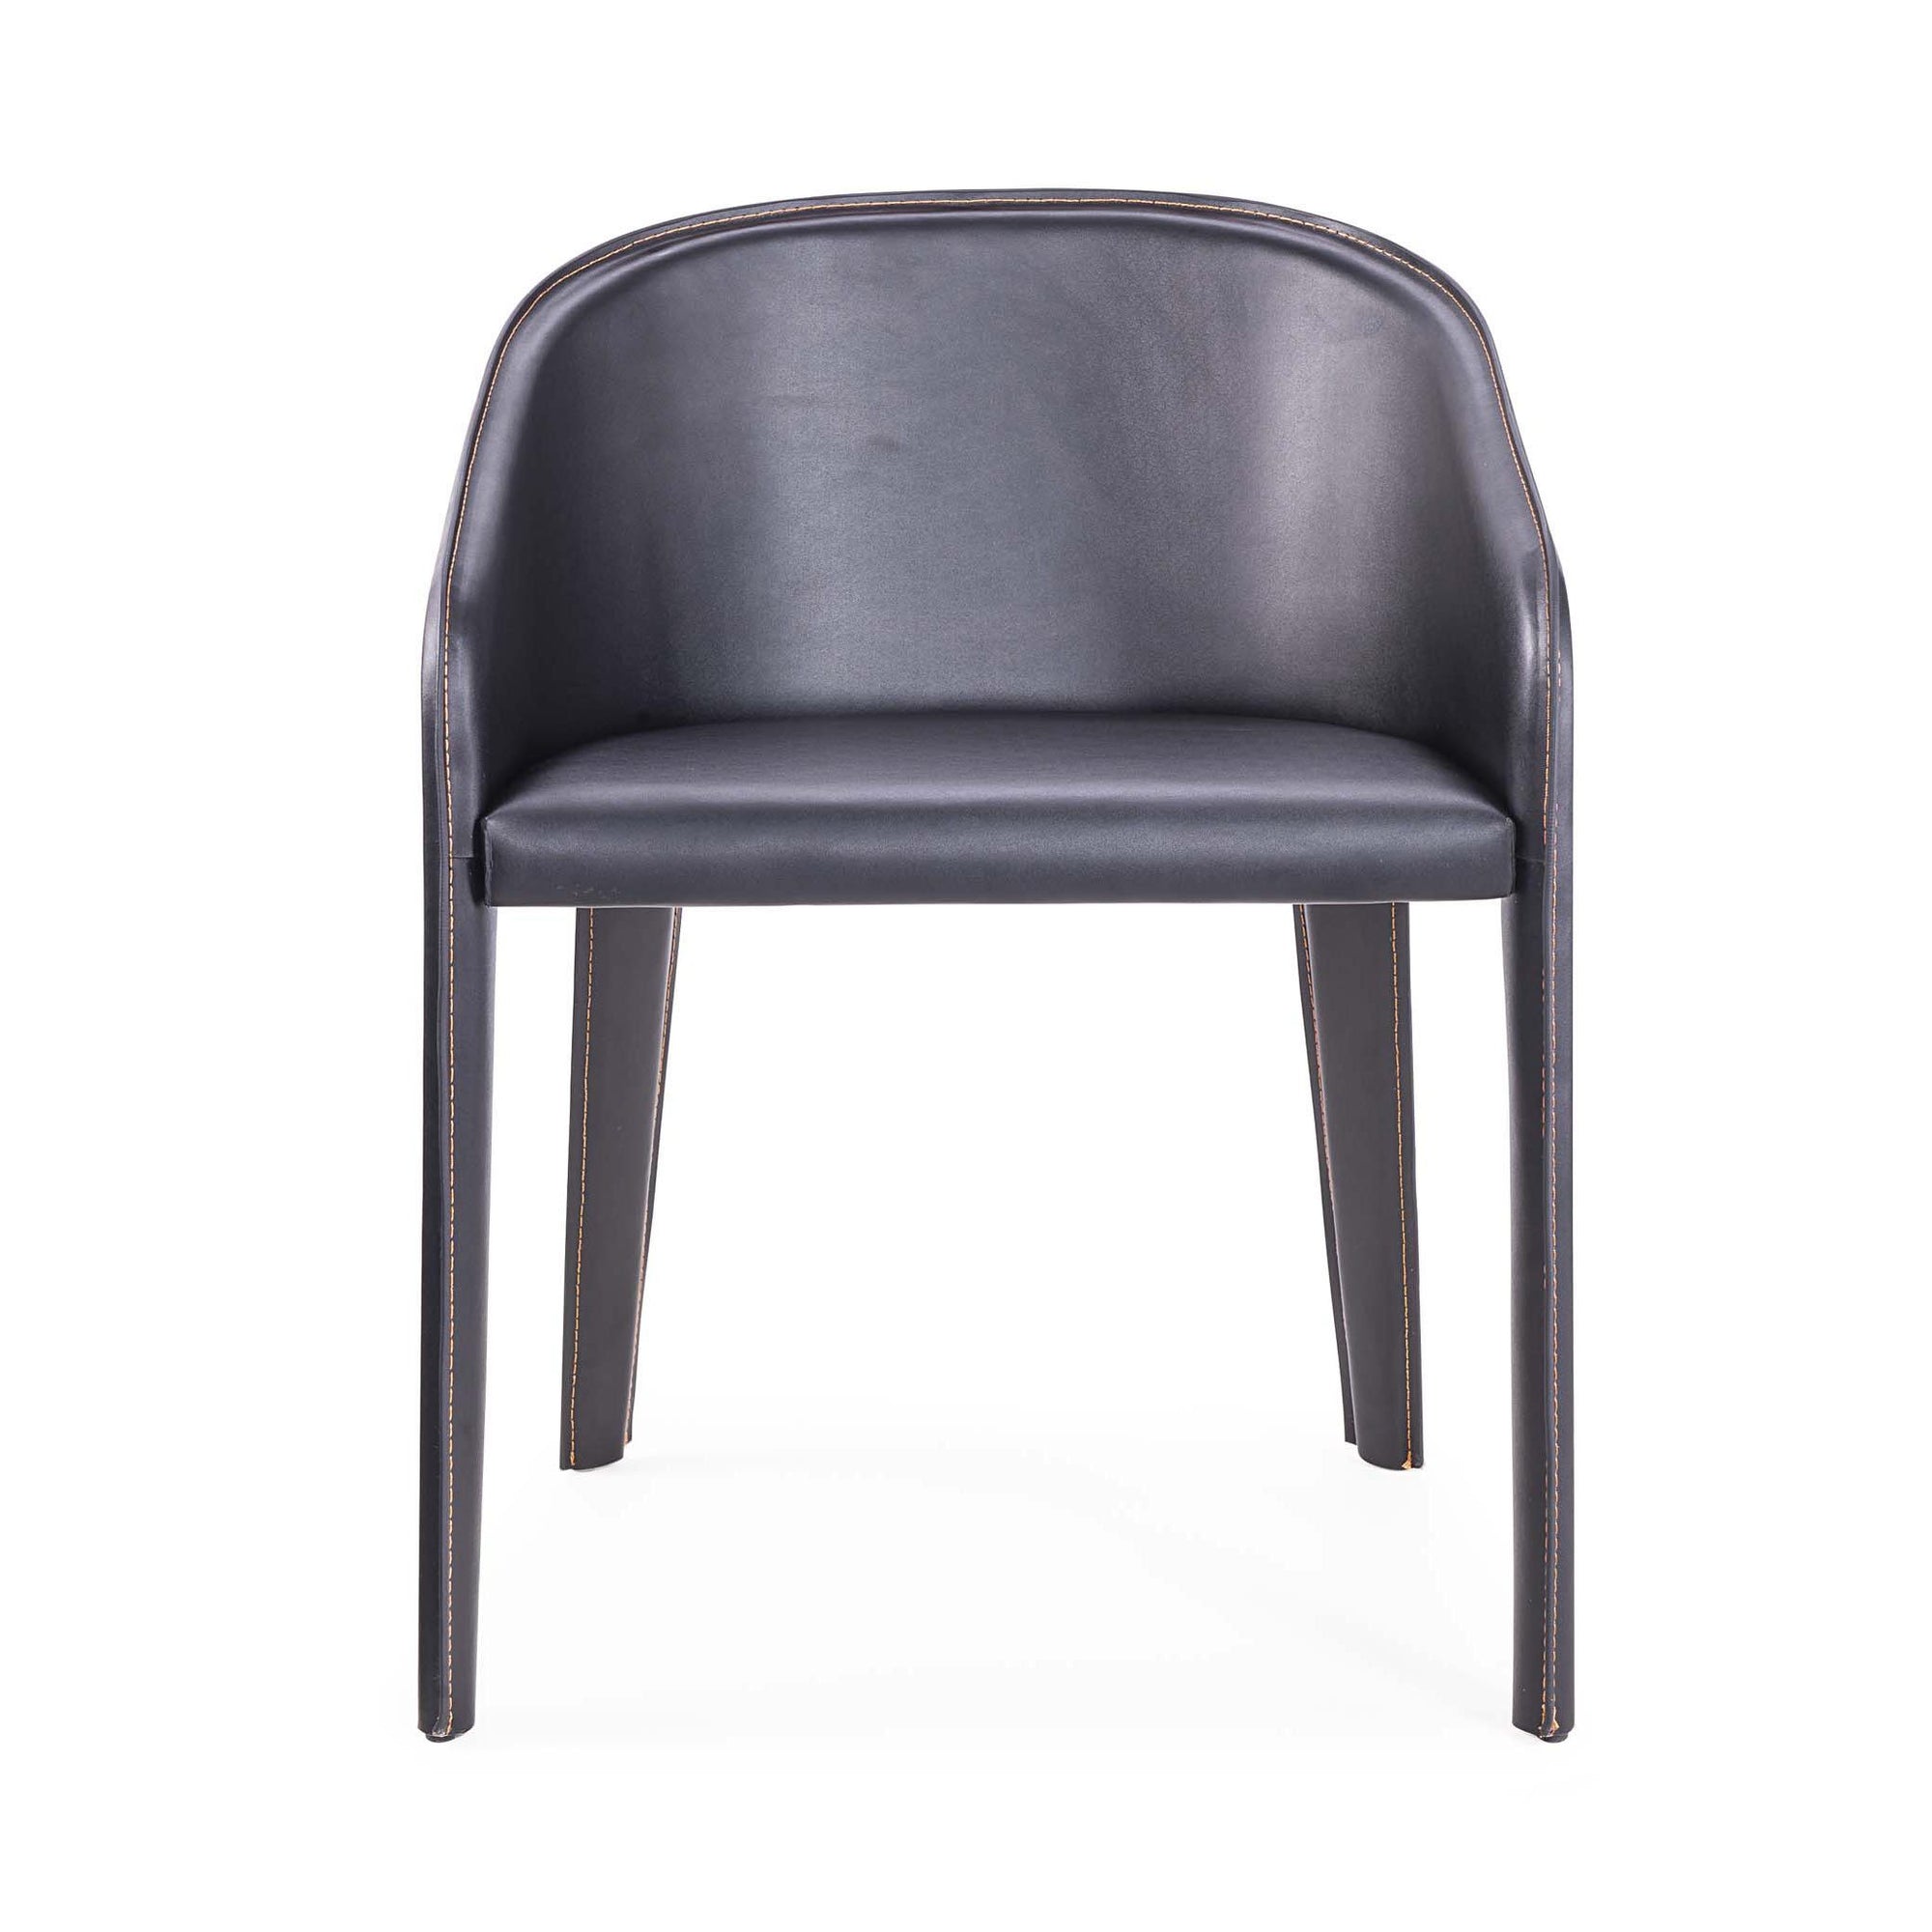 Bellini-Antonia Dining Chair-Dining Chairs-MODTEMPO